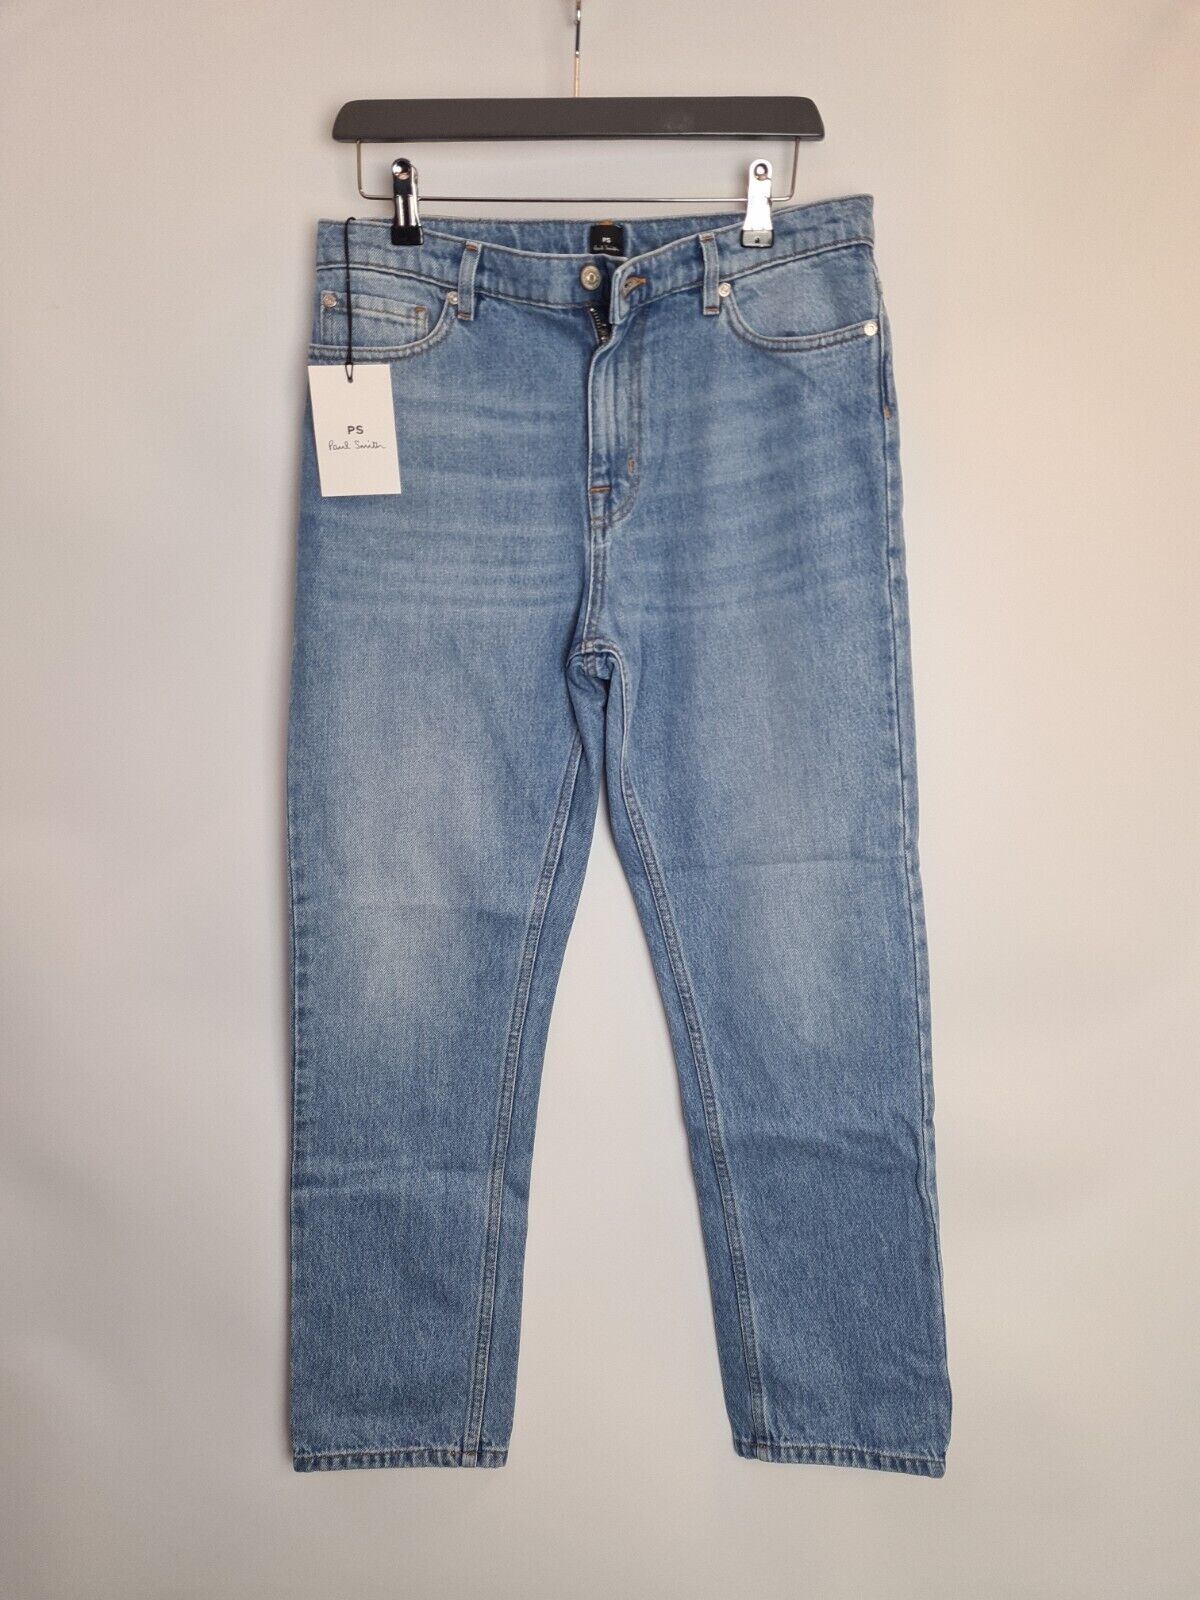 Paul Smith Womens Light Wash Blue Jeans With Logo Size 28 **** V61